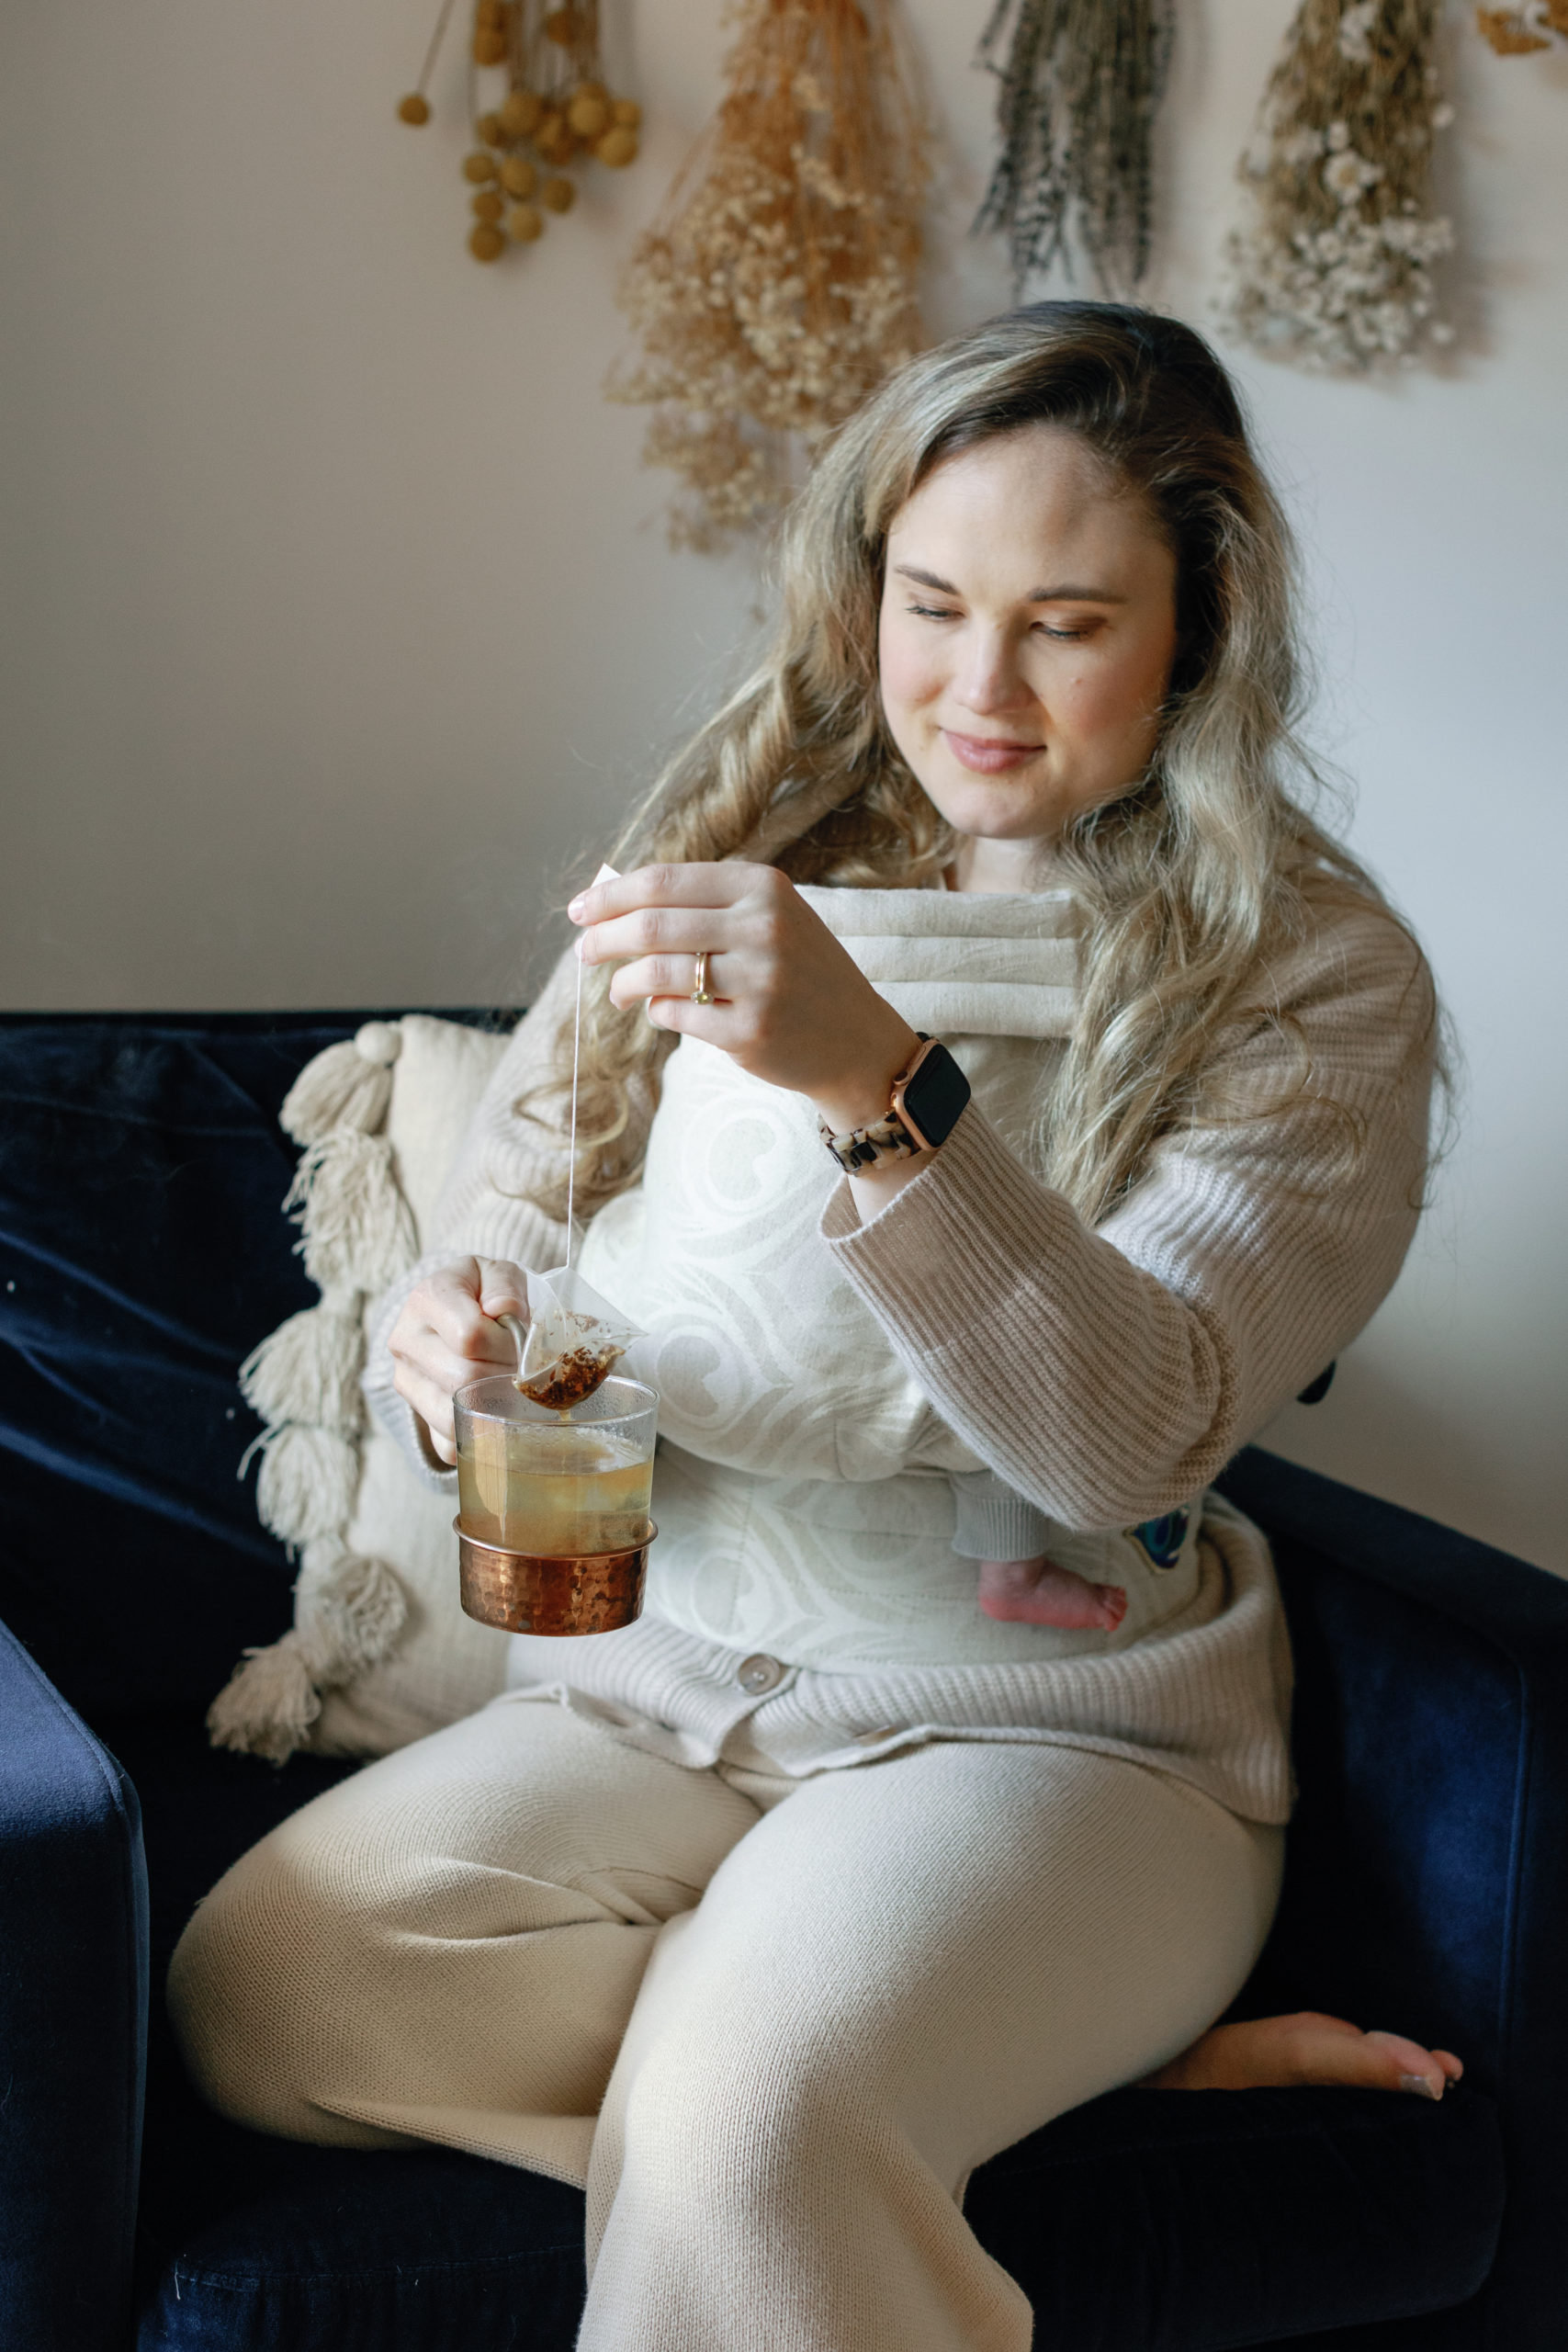 A woman wearing tan wearing her baby in a tan carrier on her front side while holding a tea bag she has dipped in her mug.